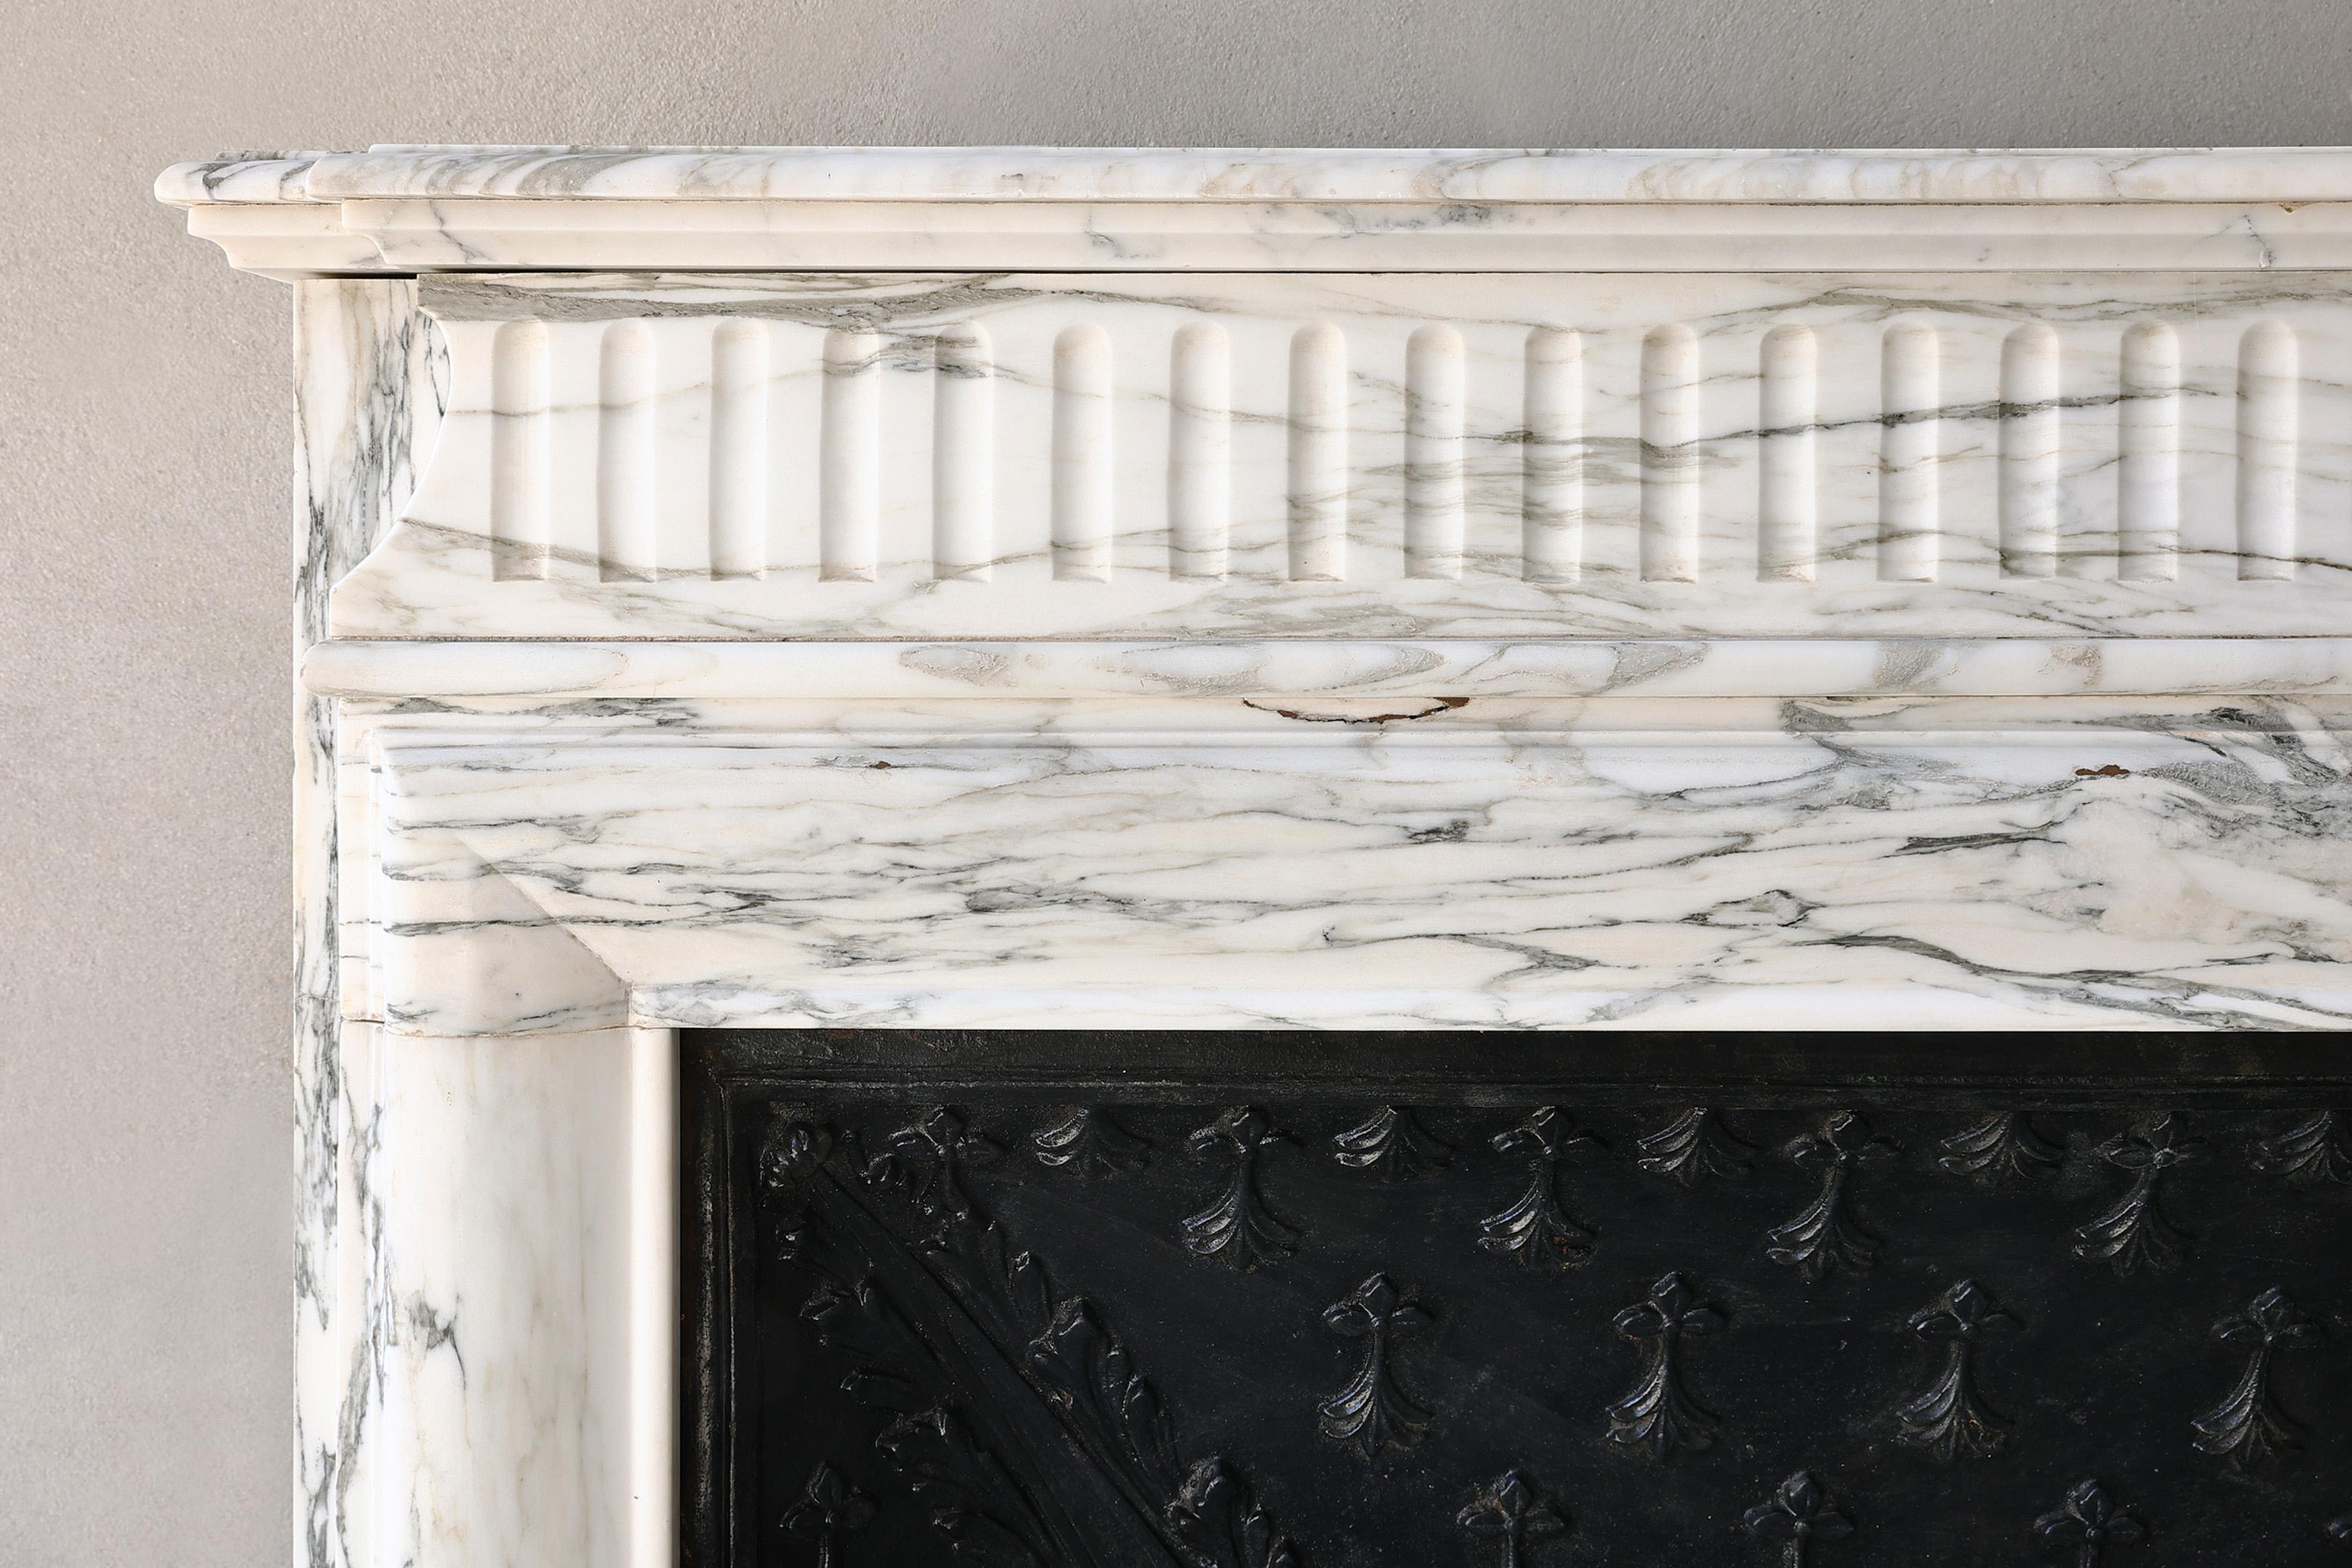 19th Century Carrara marble fireplace from the 19th century in style of Louis XIV